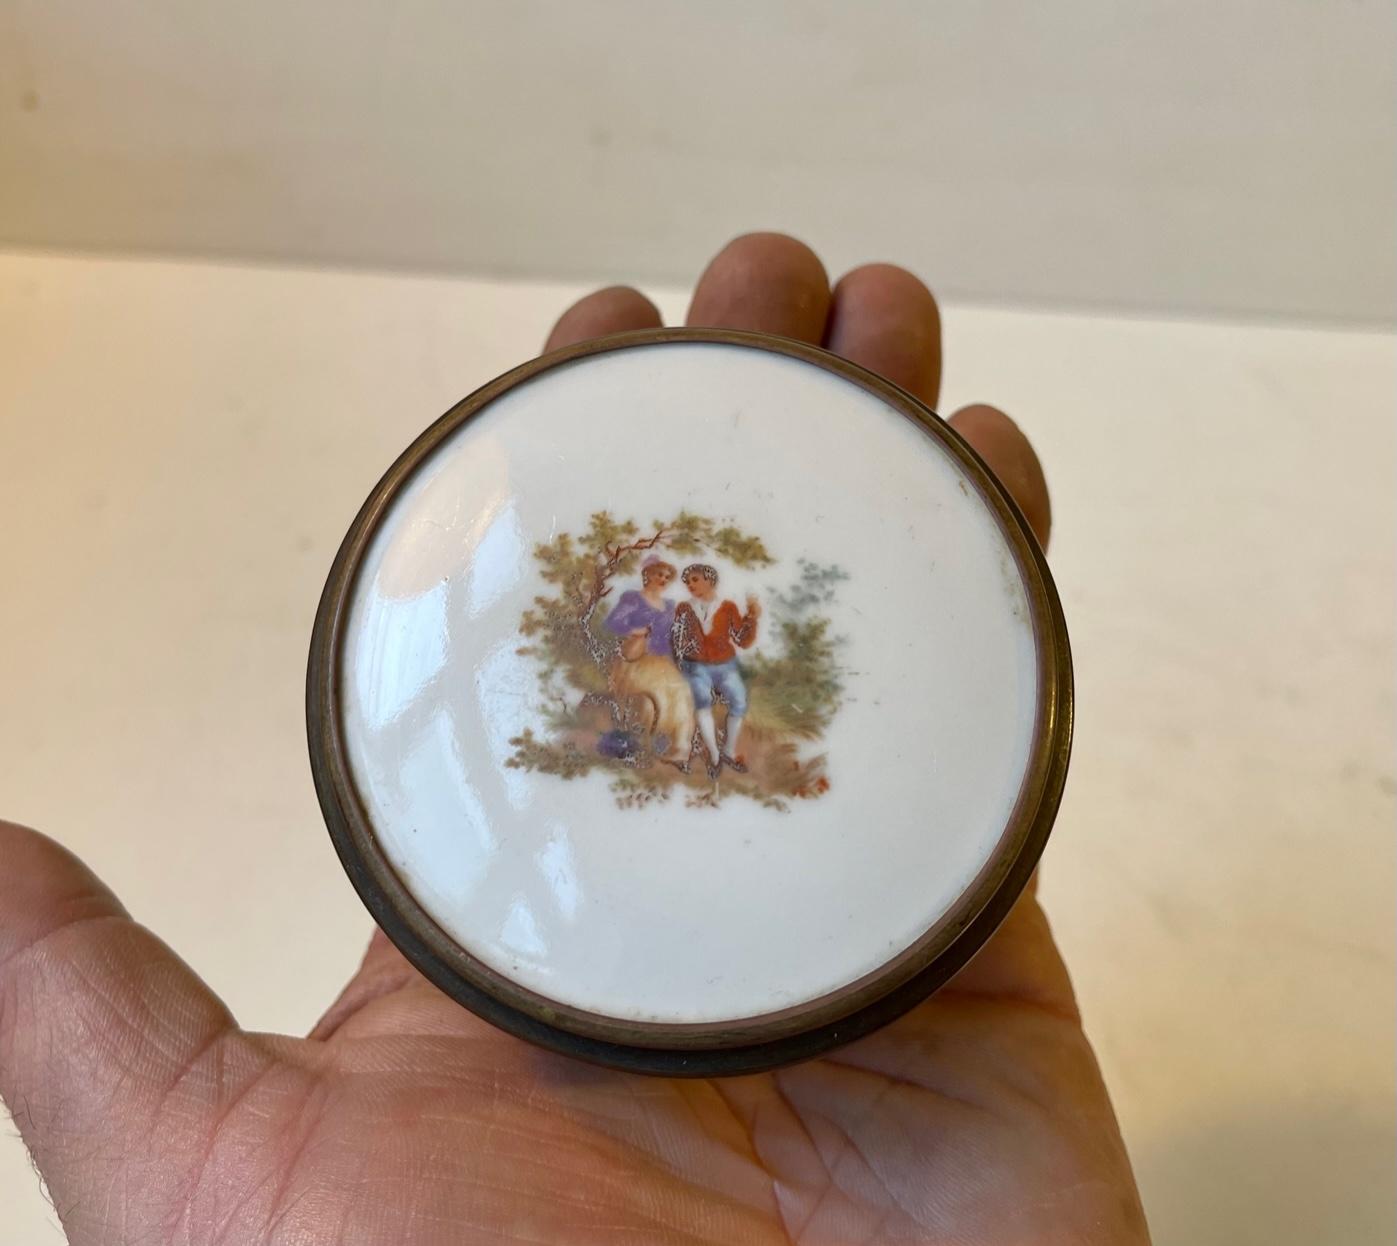 A beautiful vanity or powder trinket featuring a bronze lid with hand painted miniture romantic scene on white porcelain. The frosted glass bottom-part is decorated with hand painted flowers around its perimeter. Unknown French maker late 19th